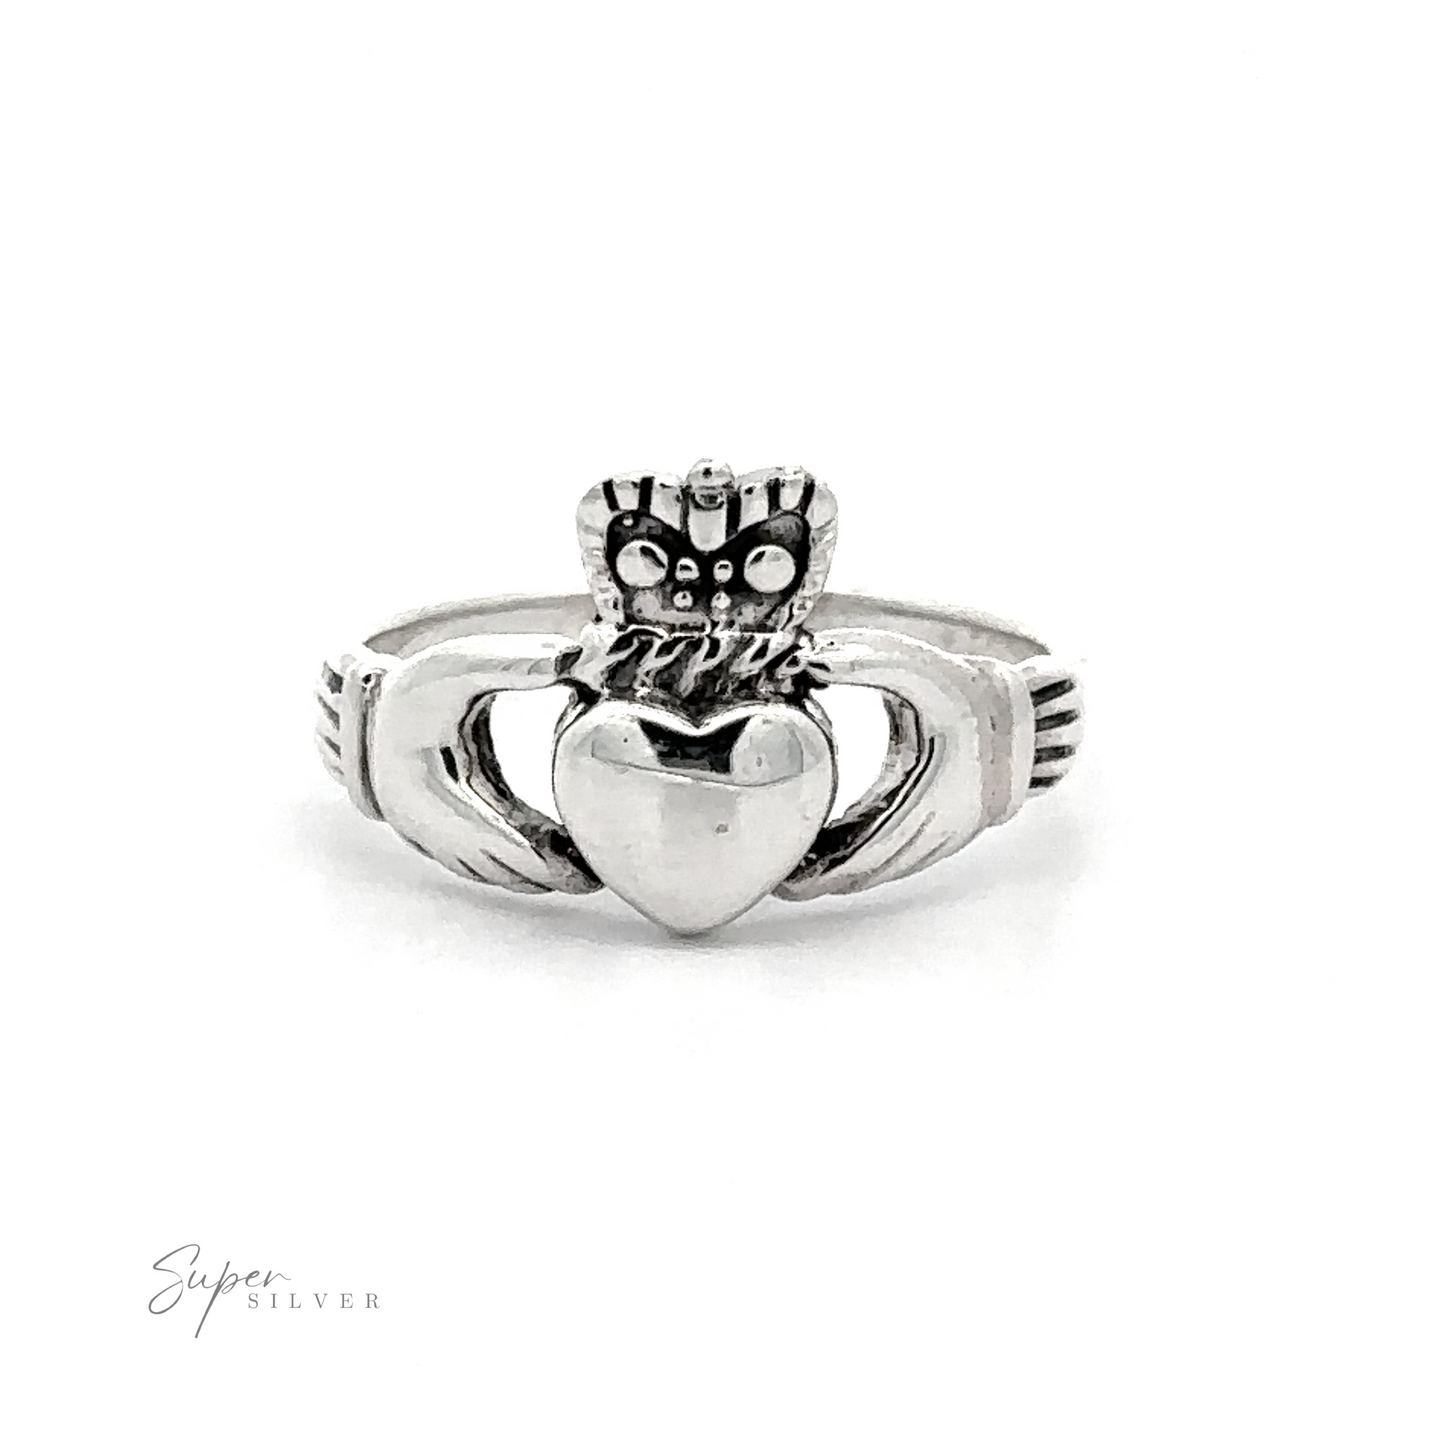 Silver Claddagh Ring featuring a heart held by two hands with a crown on top, displayed against a white background.